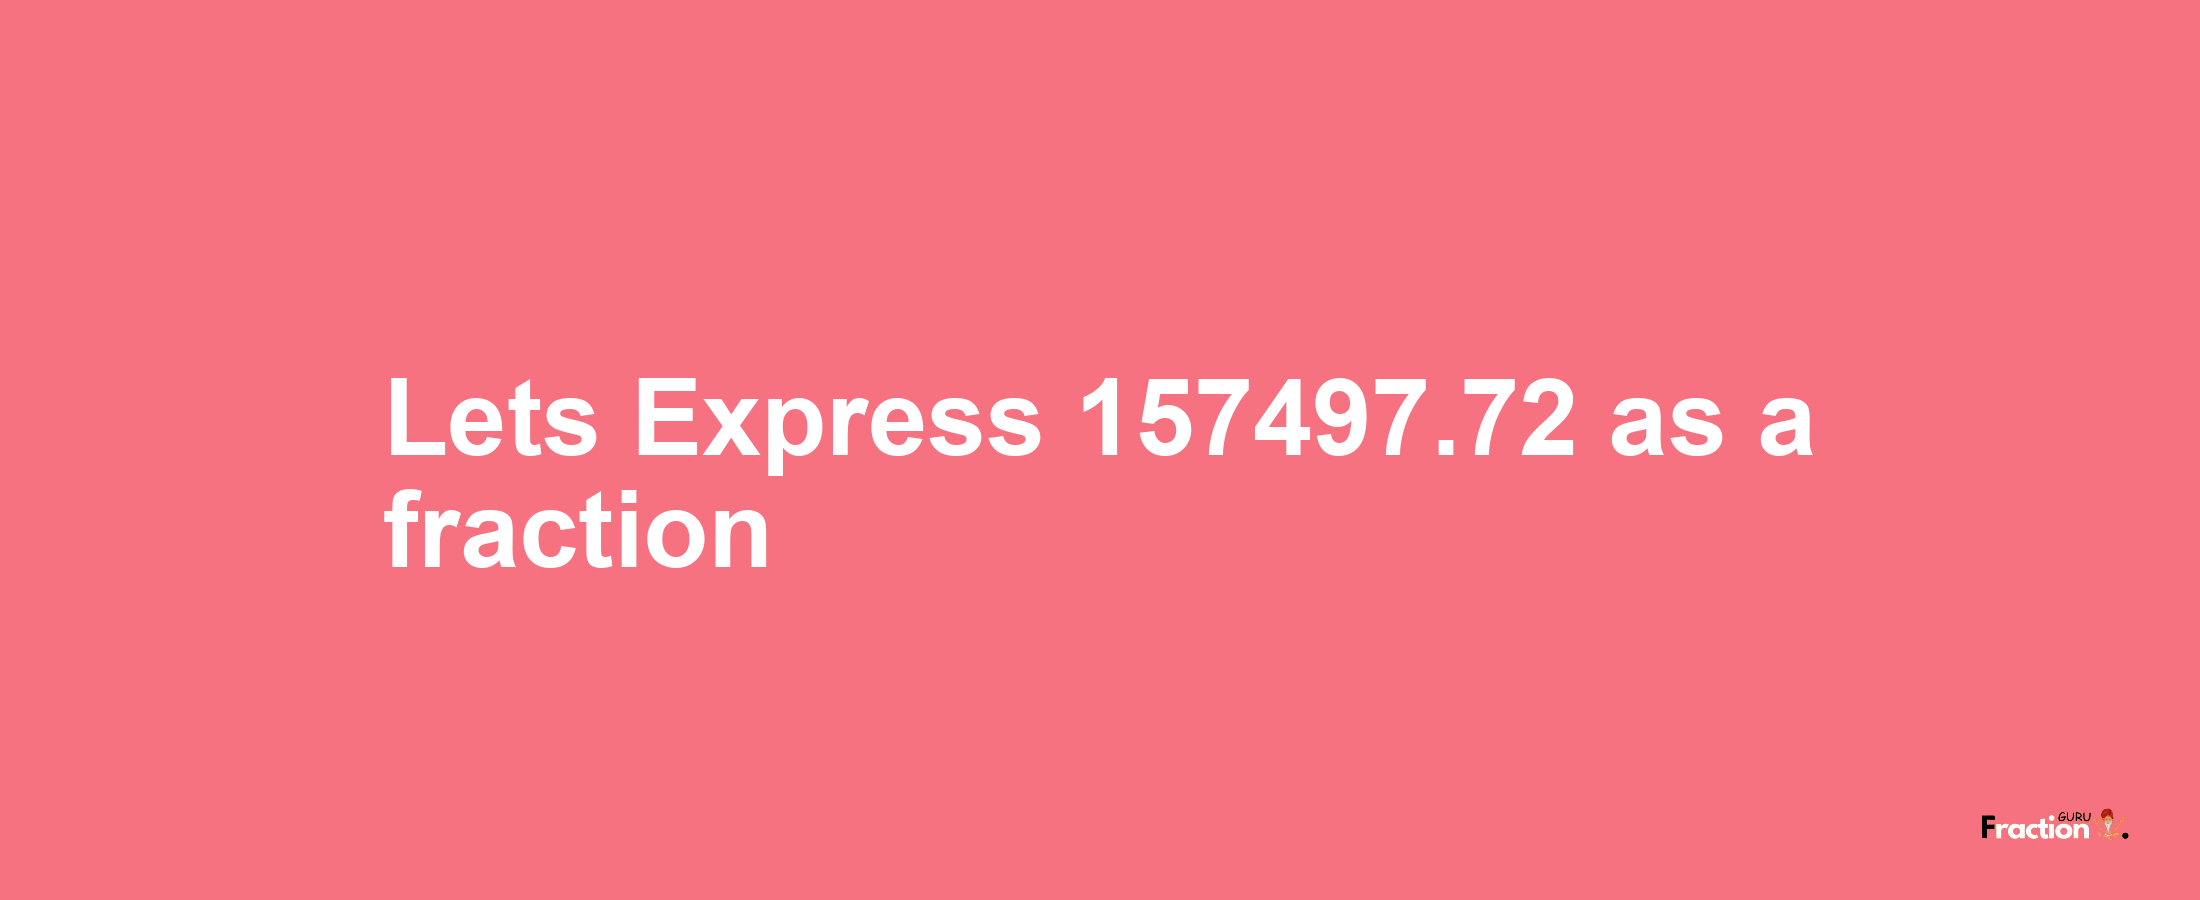 Lets Express 157497.72 as afraction